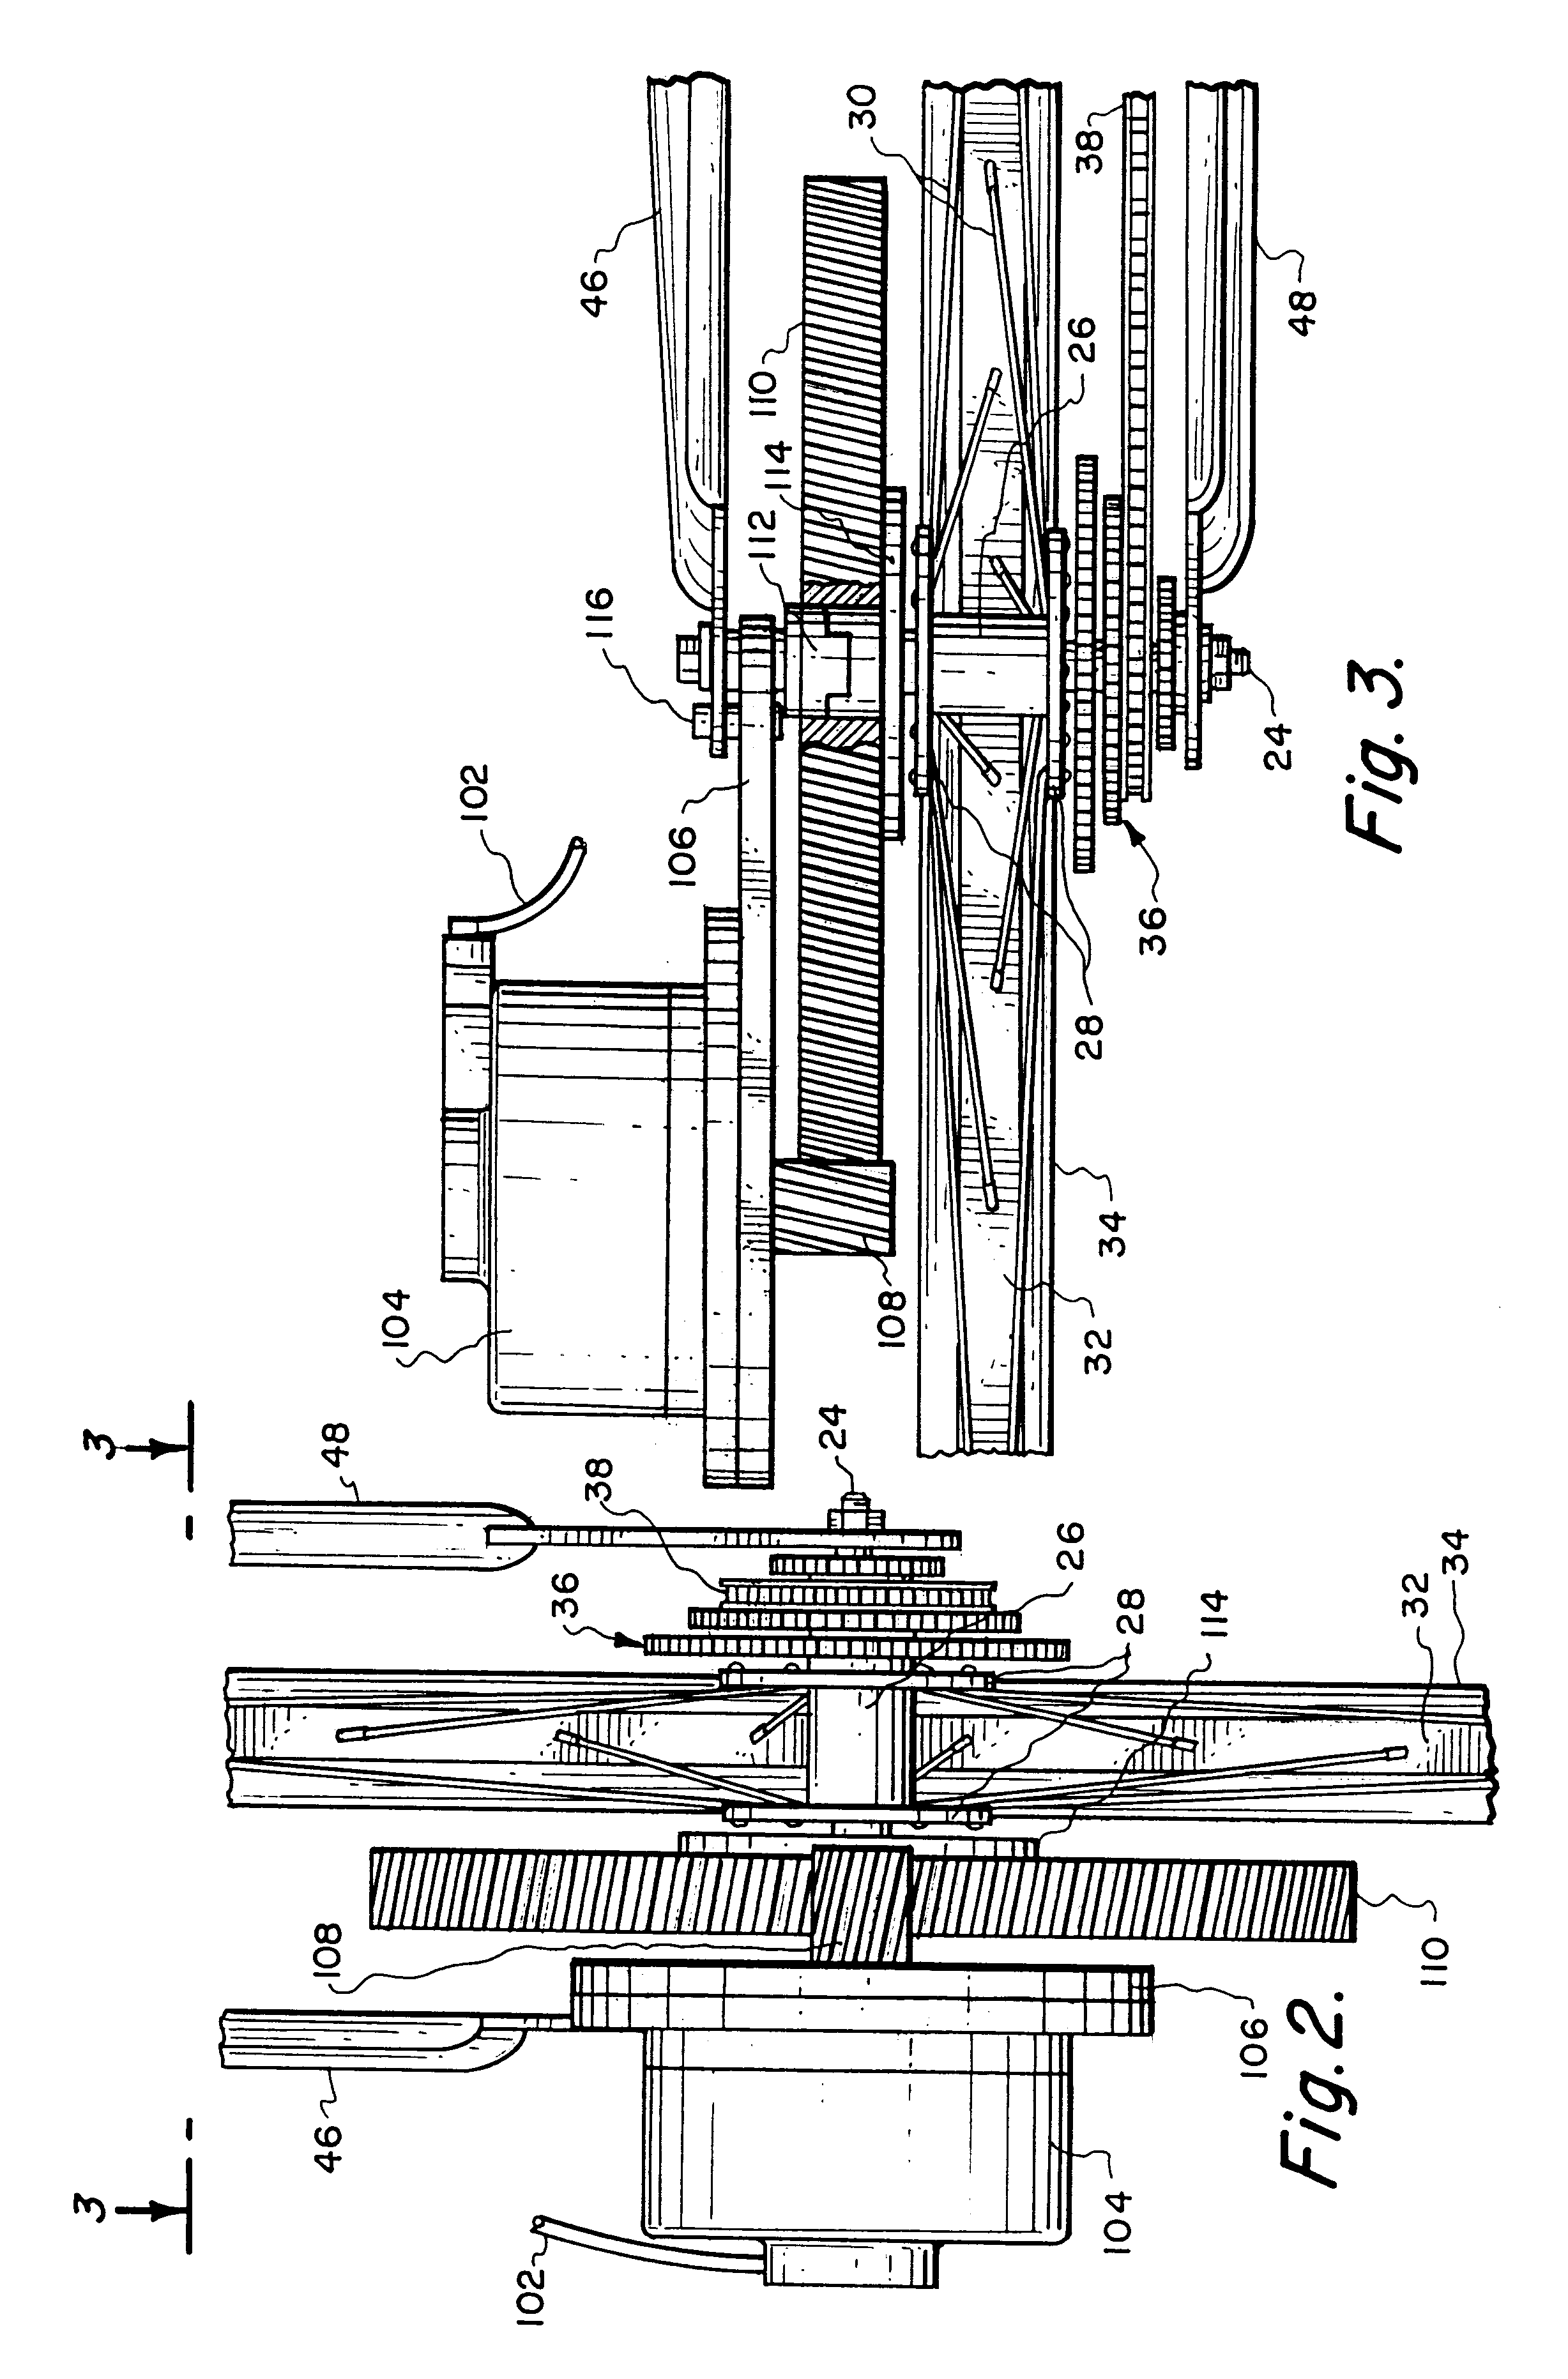 Precision direct drive mechanism for a power assist apparatus for a bicycle